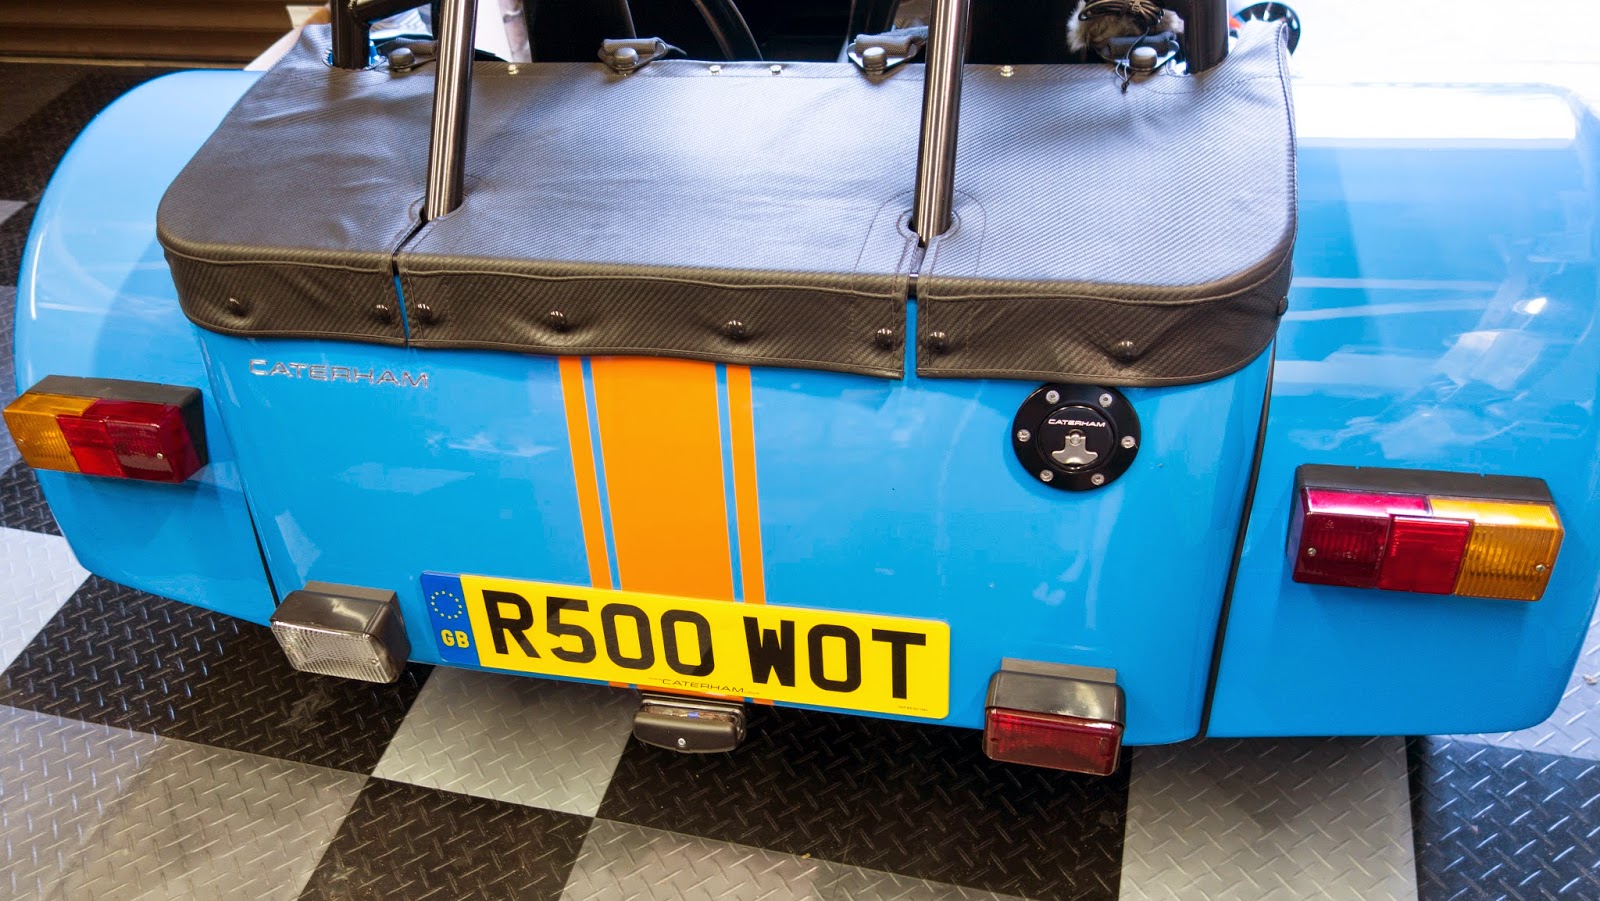 Caterham R500 with standard rear indicators and light blocks.